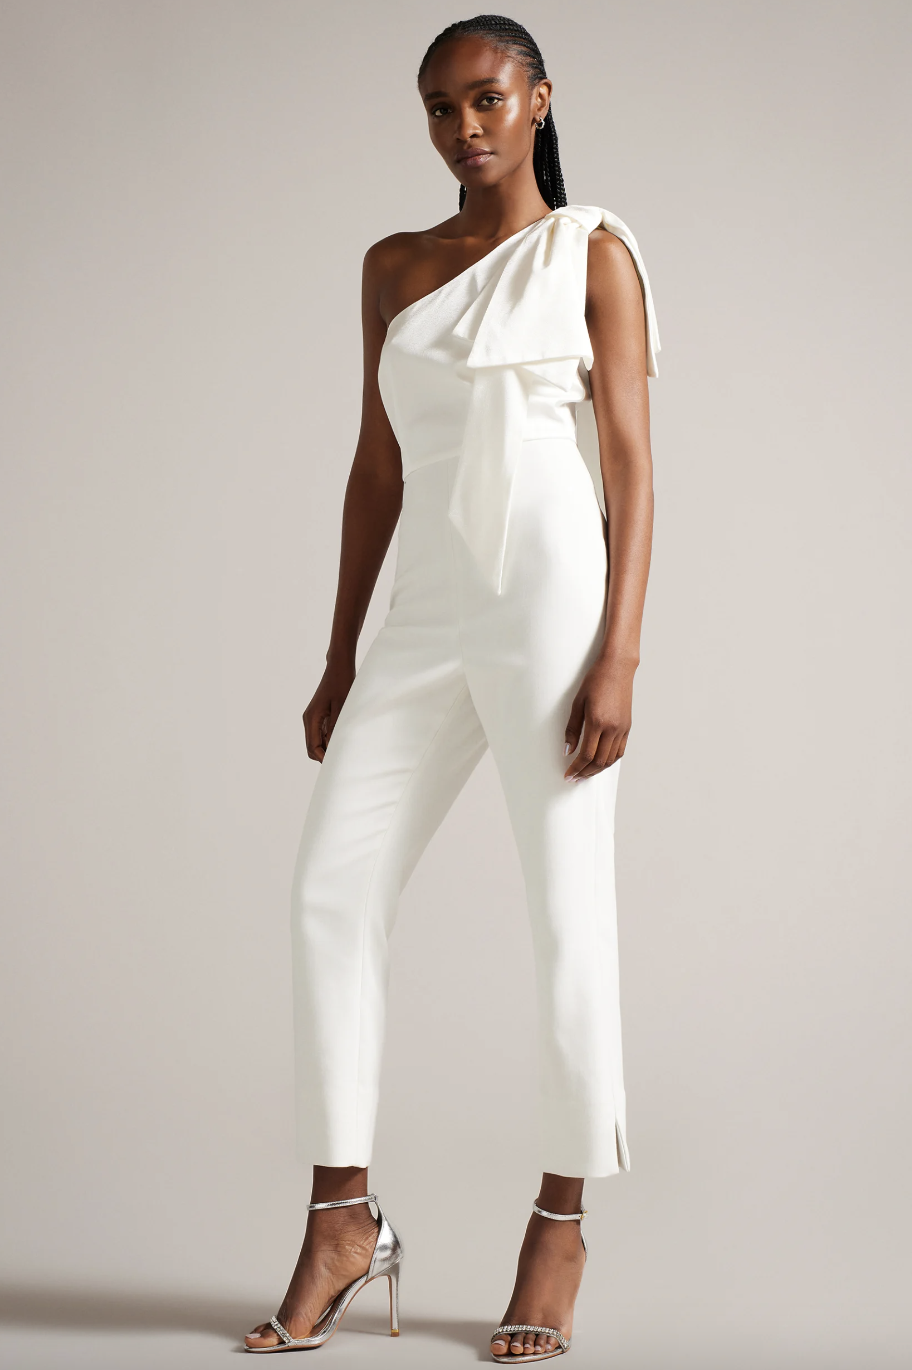 The Best Wedding Jumpsuits for Every Bridal Style